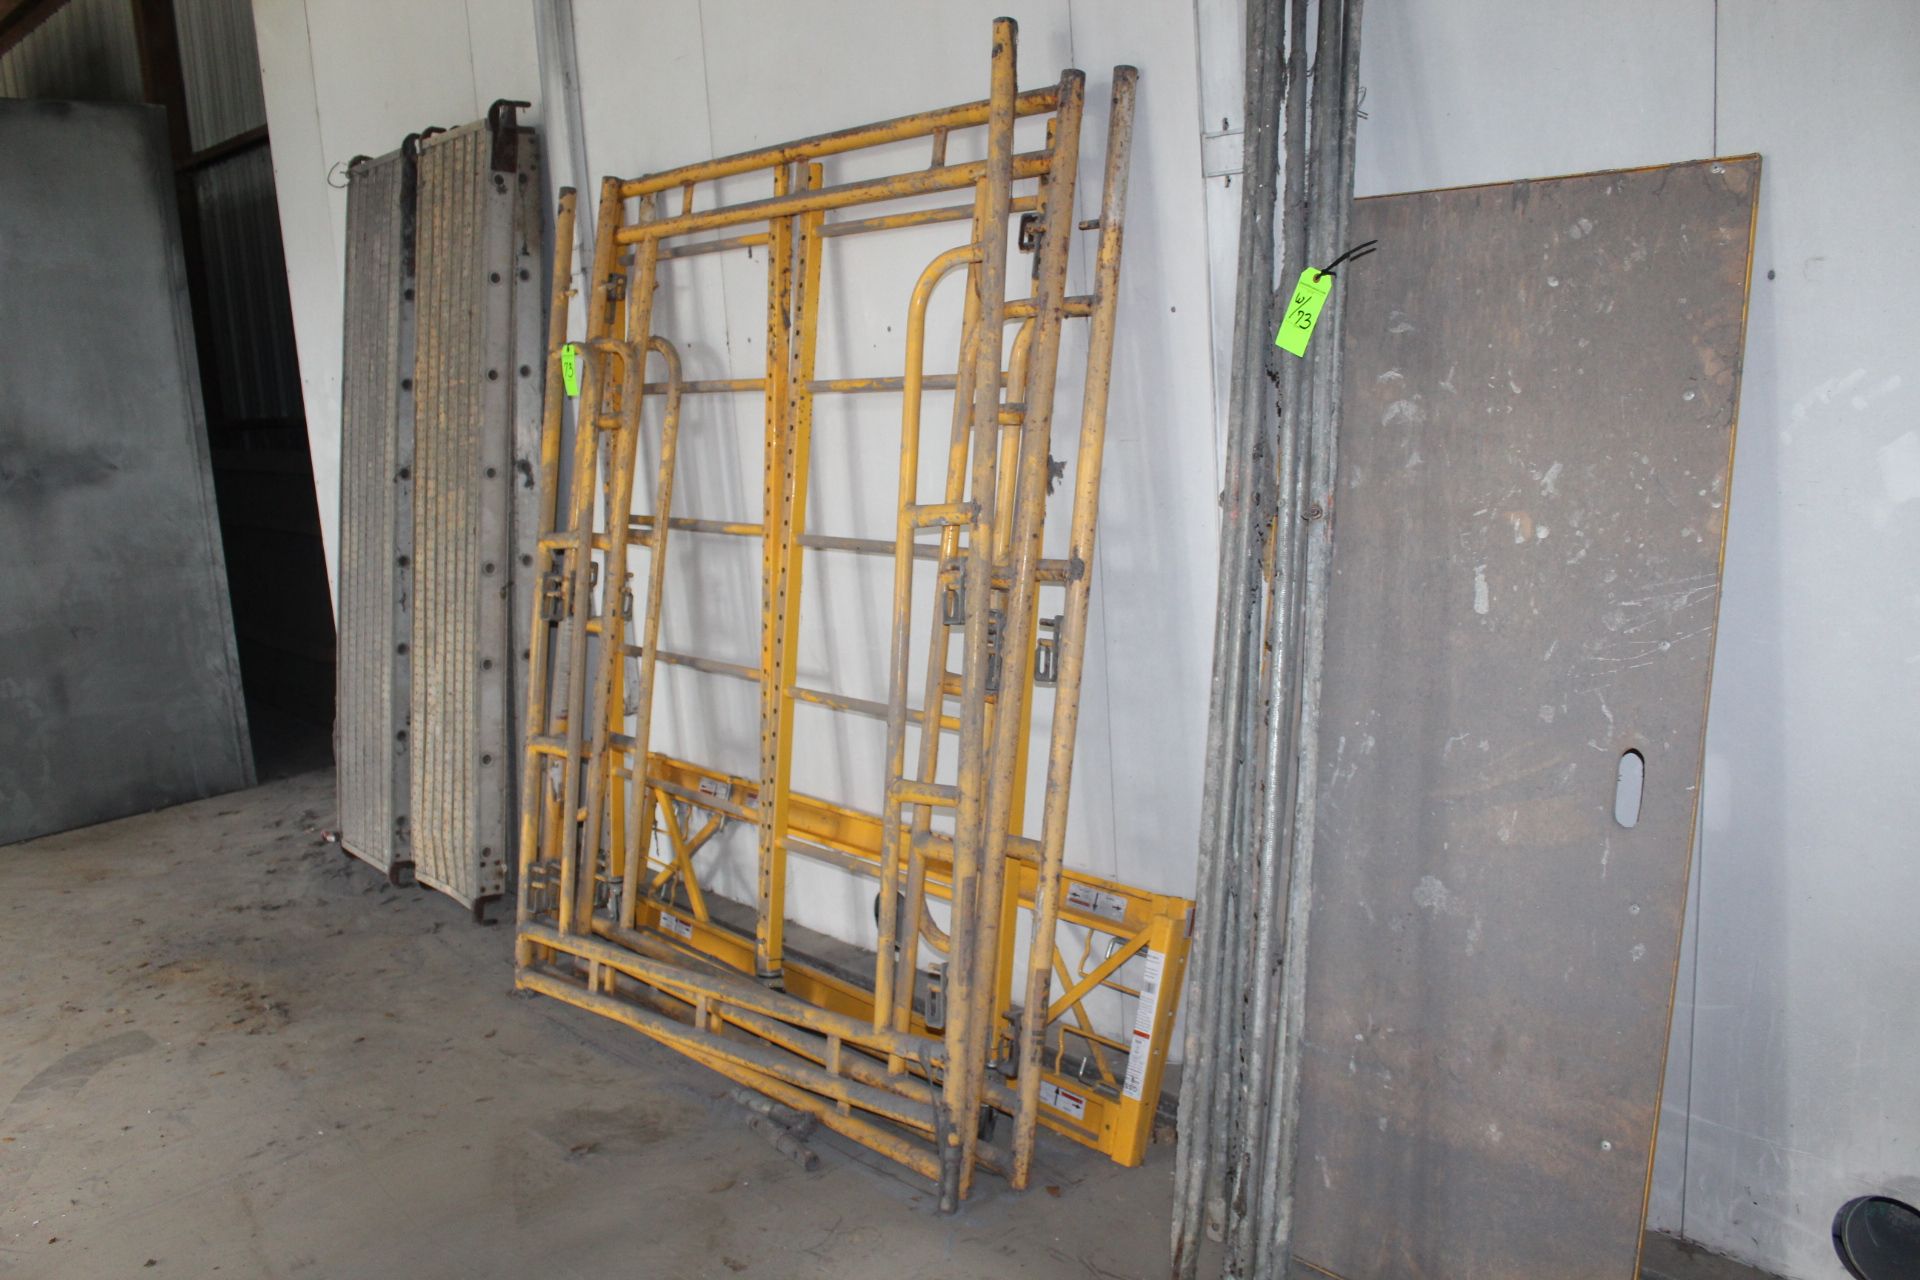 Scaffolding Parts; Includes (4) Walkboards, Bracing, and Pro-Series GSSI Multi-Purpose Scaffolding - Image 2 of 3